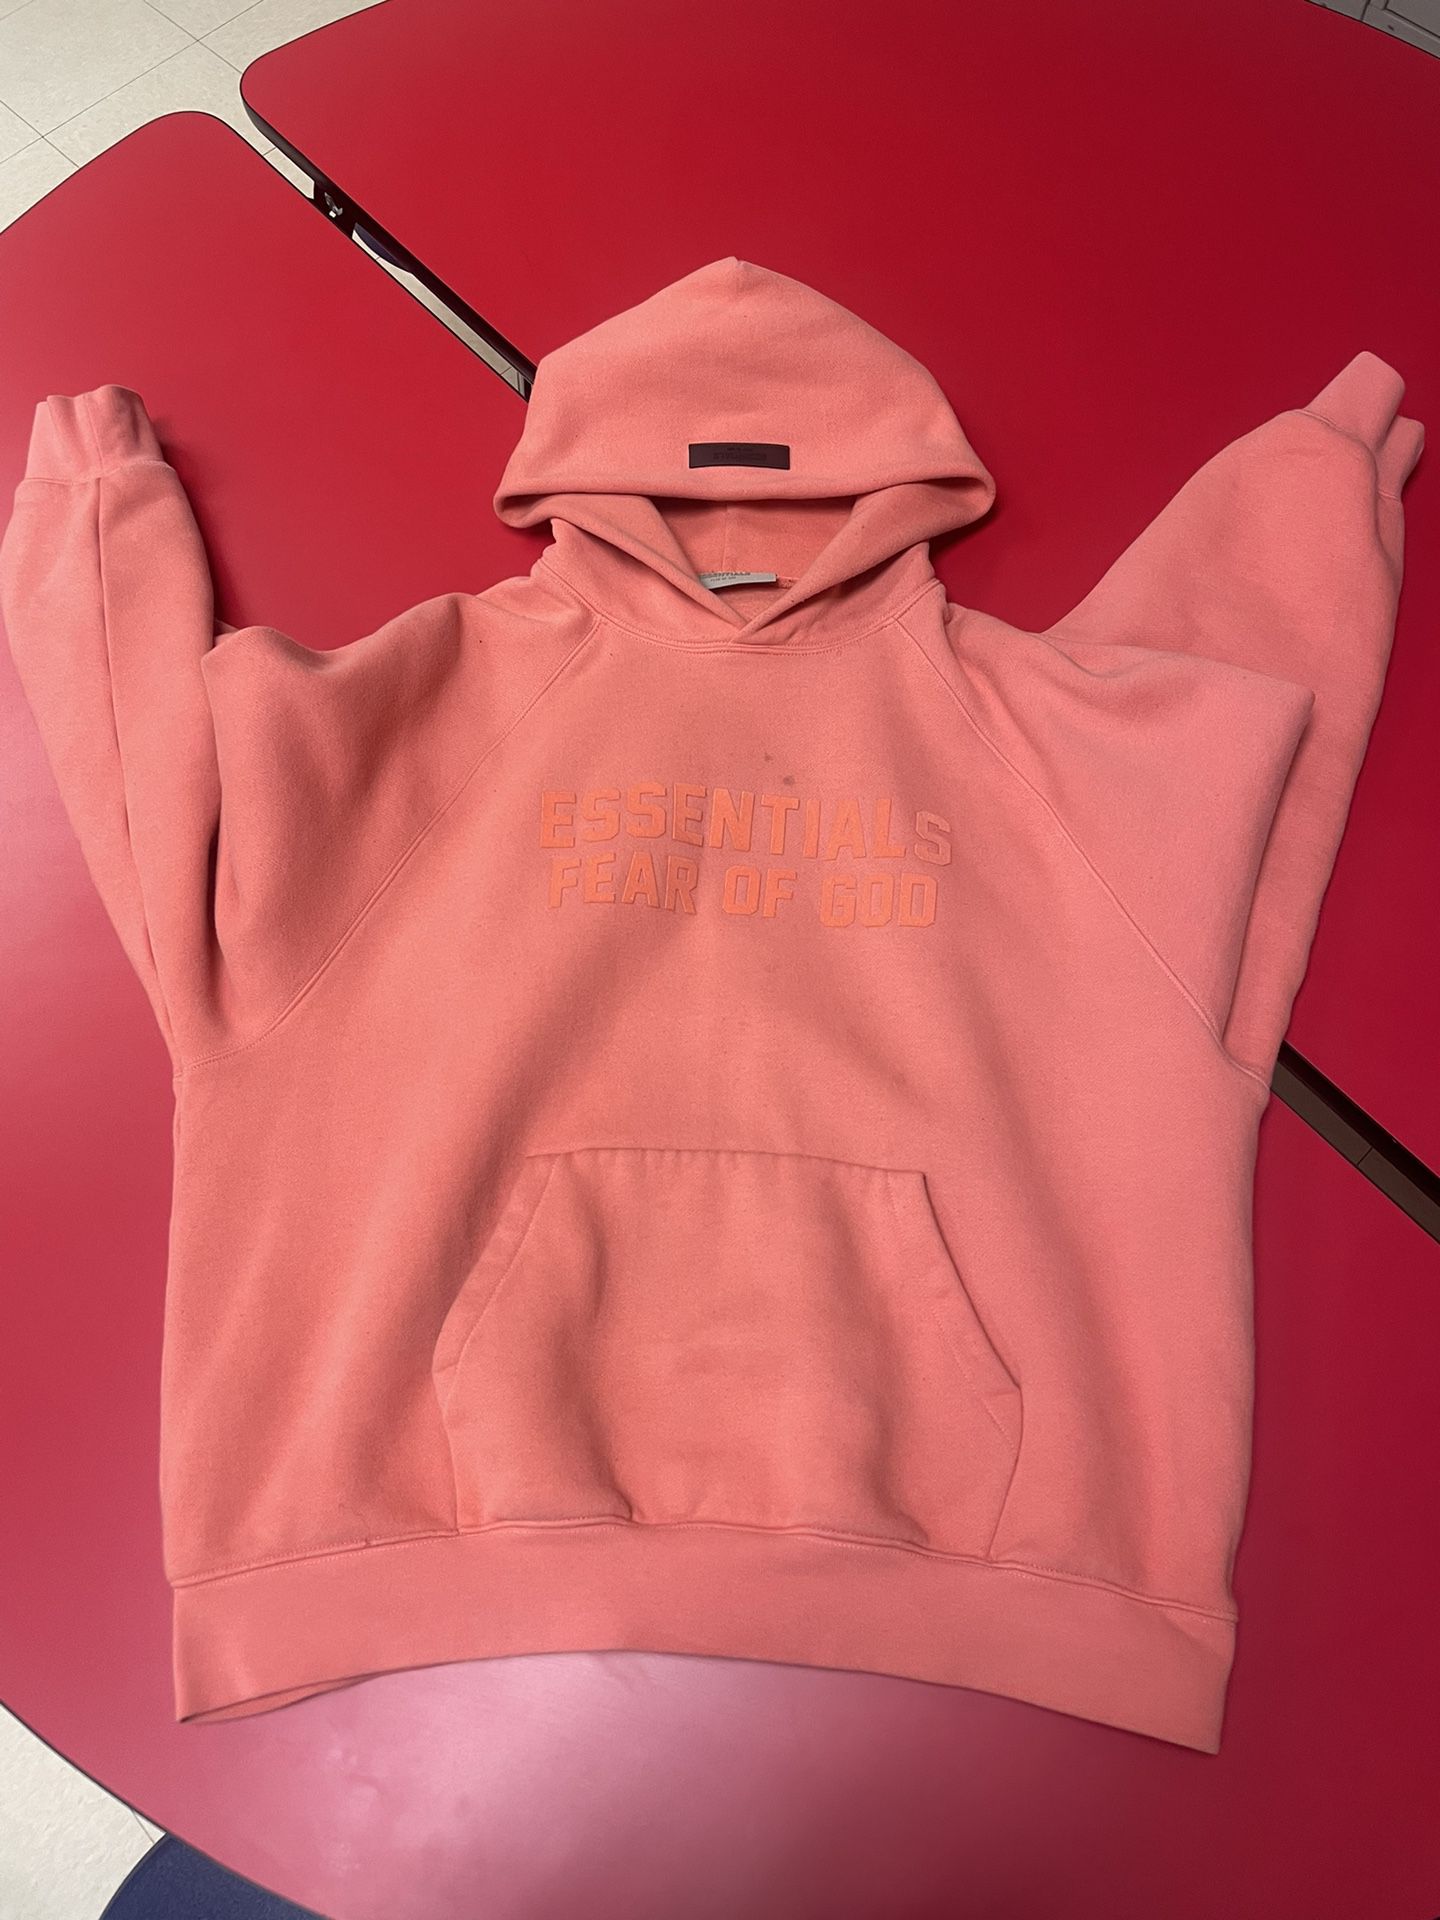 Essential Fear of God jacket color pink size me me medium median.{will accept trades}